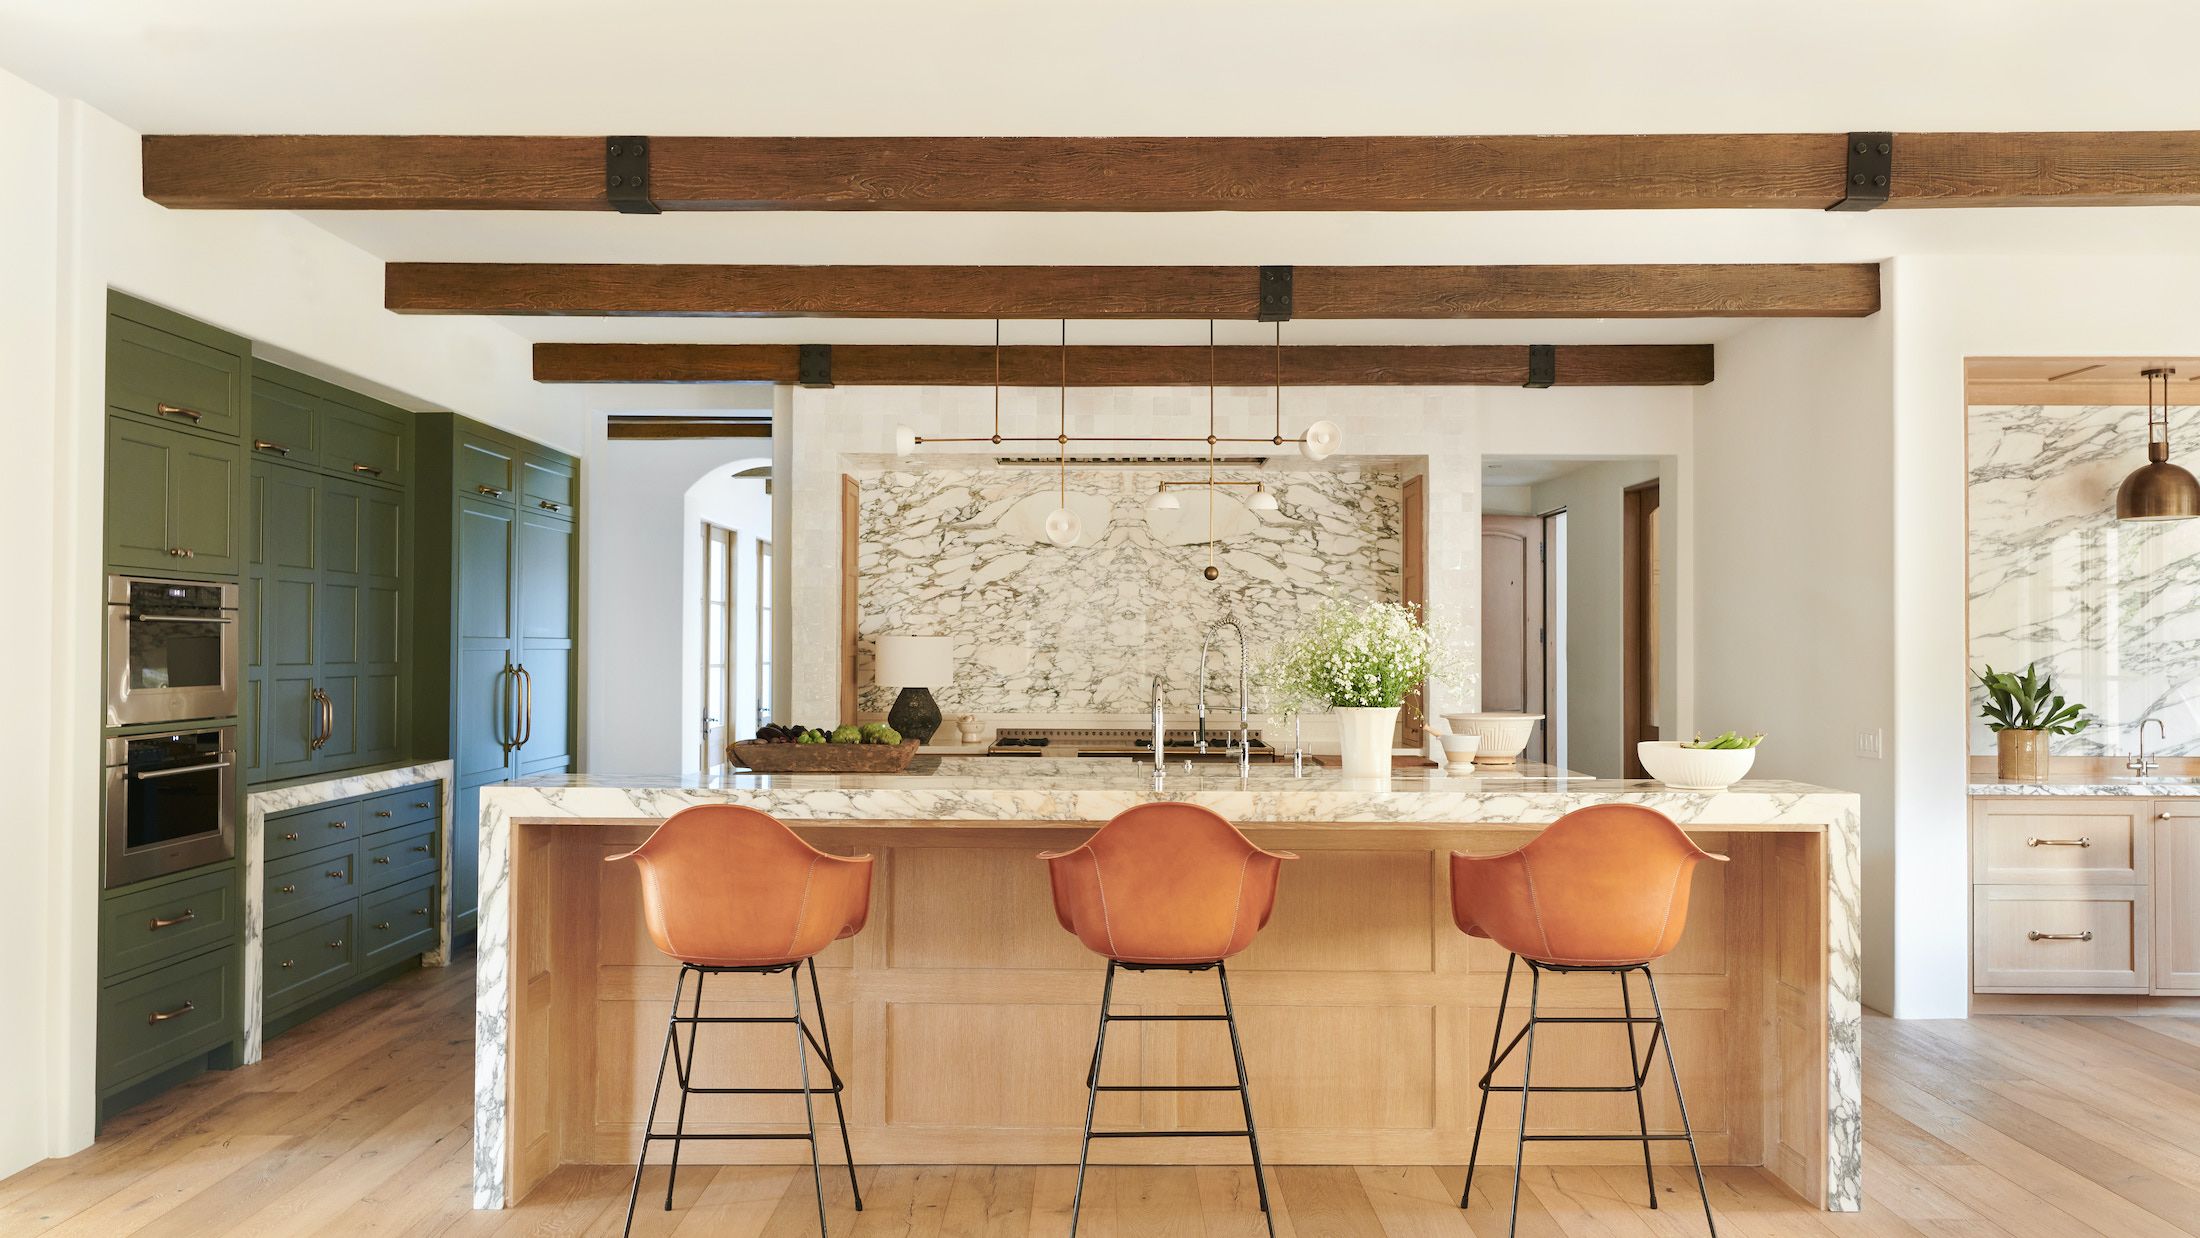 As Seen on House Digest: The Best Way to Add Extra Counter Space to Your  Kitchen 